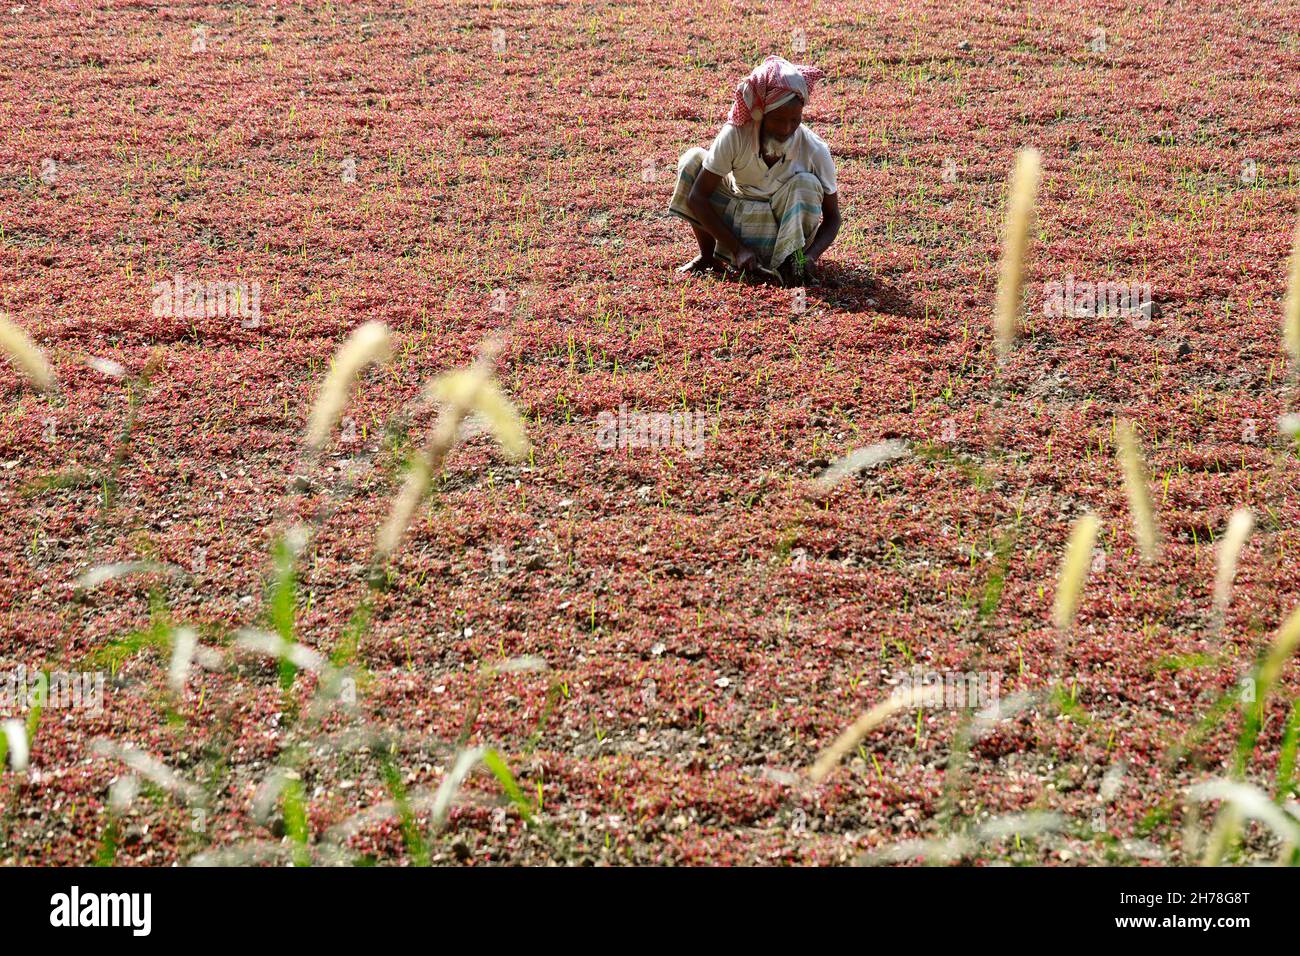 Dhaka, Bangladesh - November 19, 2021: Farmers are Attendance harvest red spinach fields in Singair of Manikganj in Bangladesh. Stock Photo